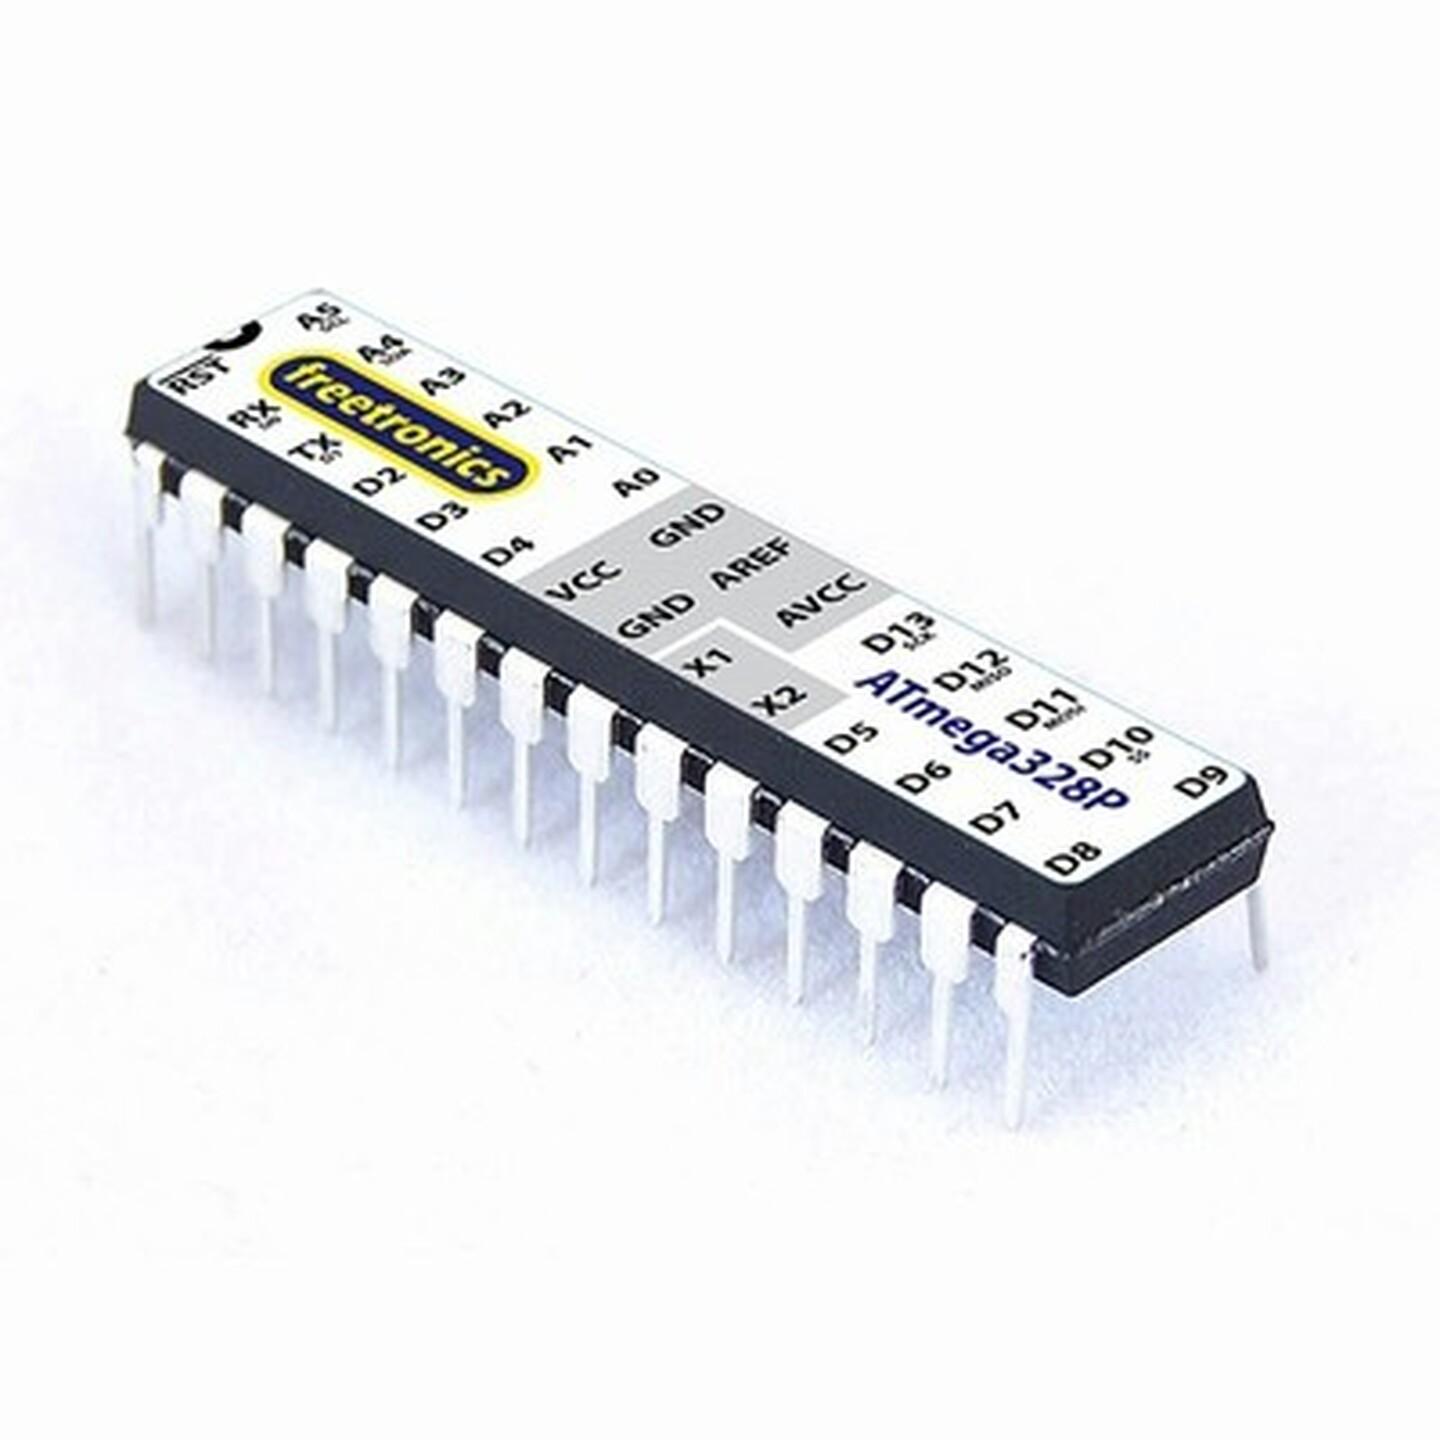 ATMEGA328P MCU IC with Arduino W/UNO Bootloader and 16MHz Crystal